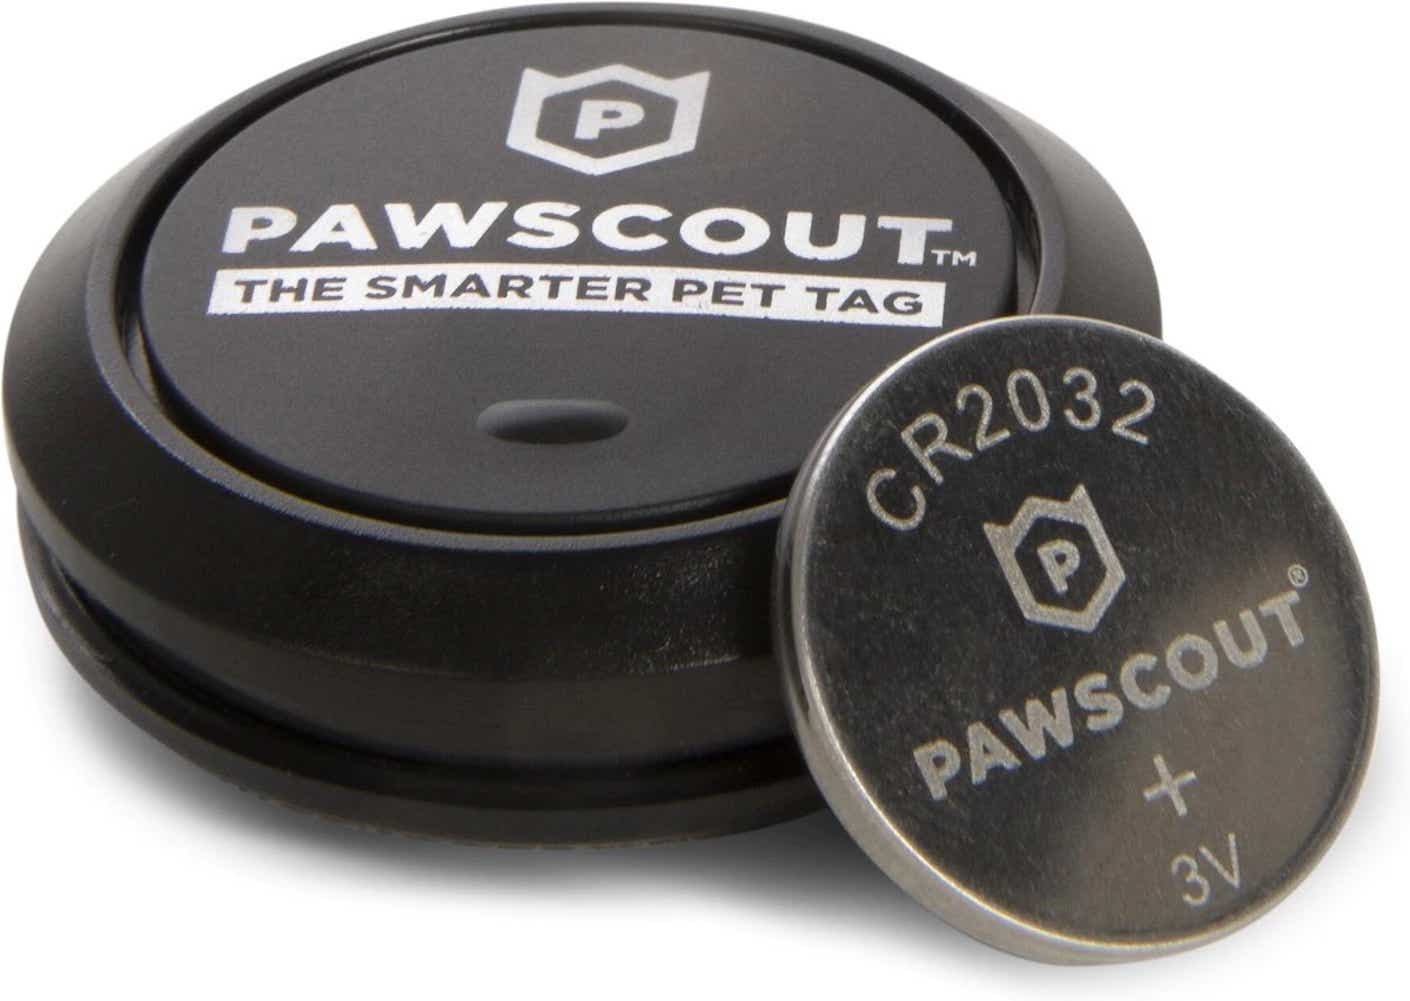 A close up shot of a black pet tag that features a tracking device.